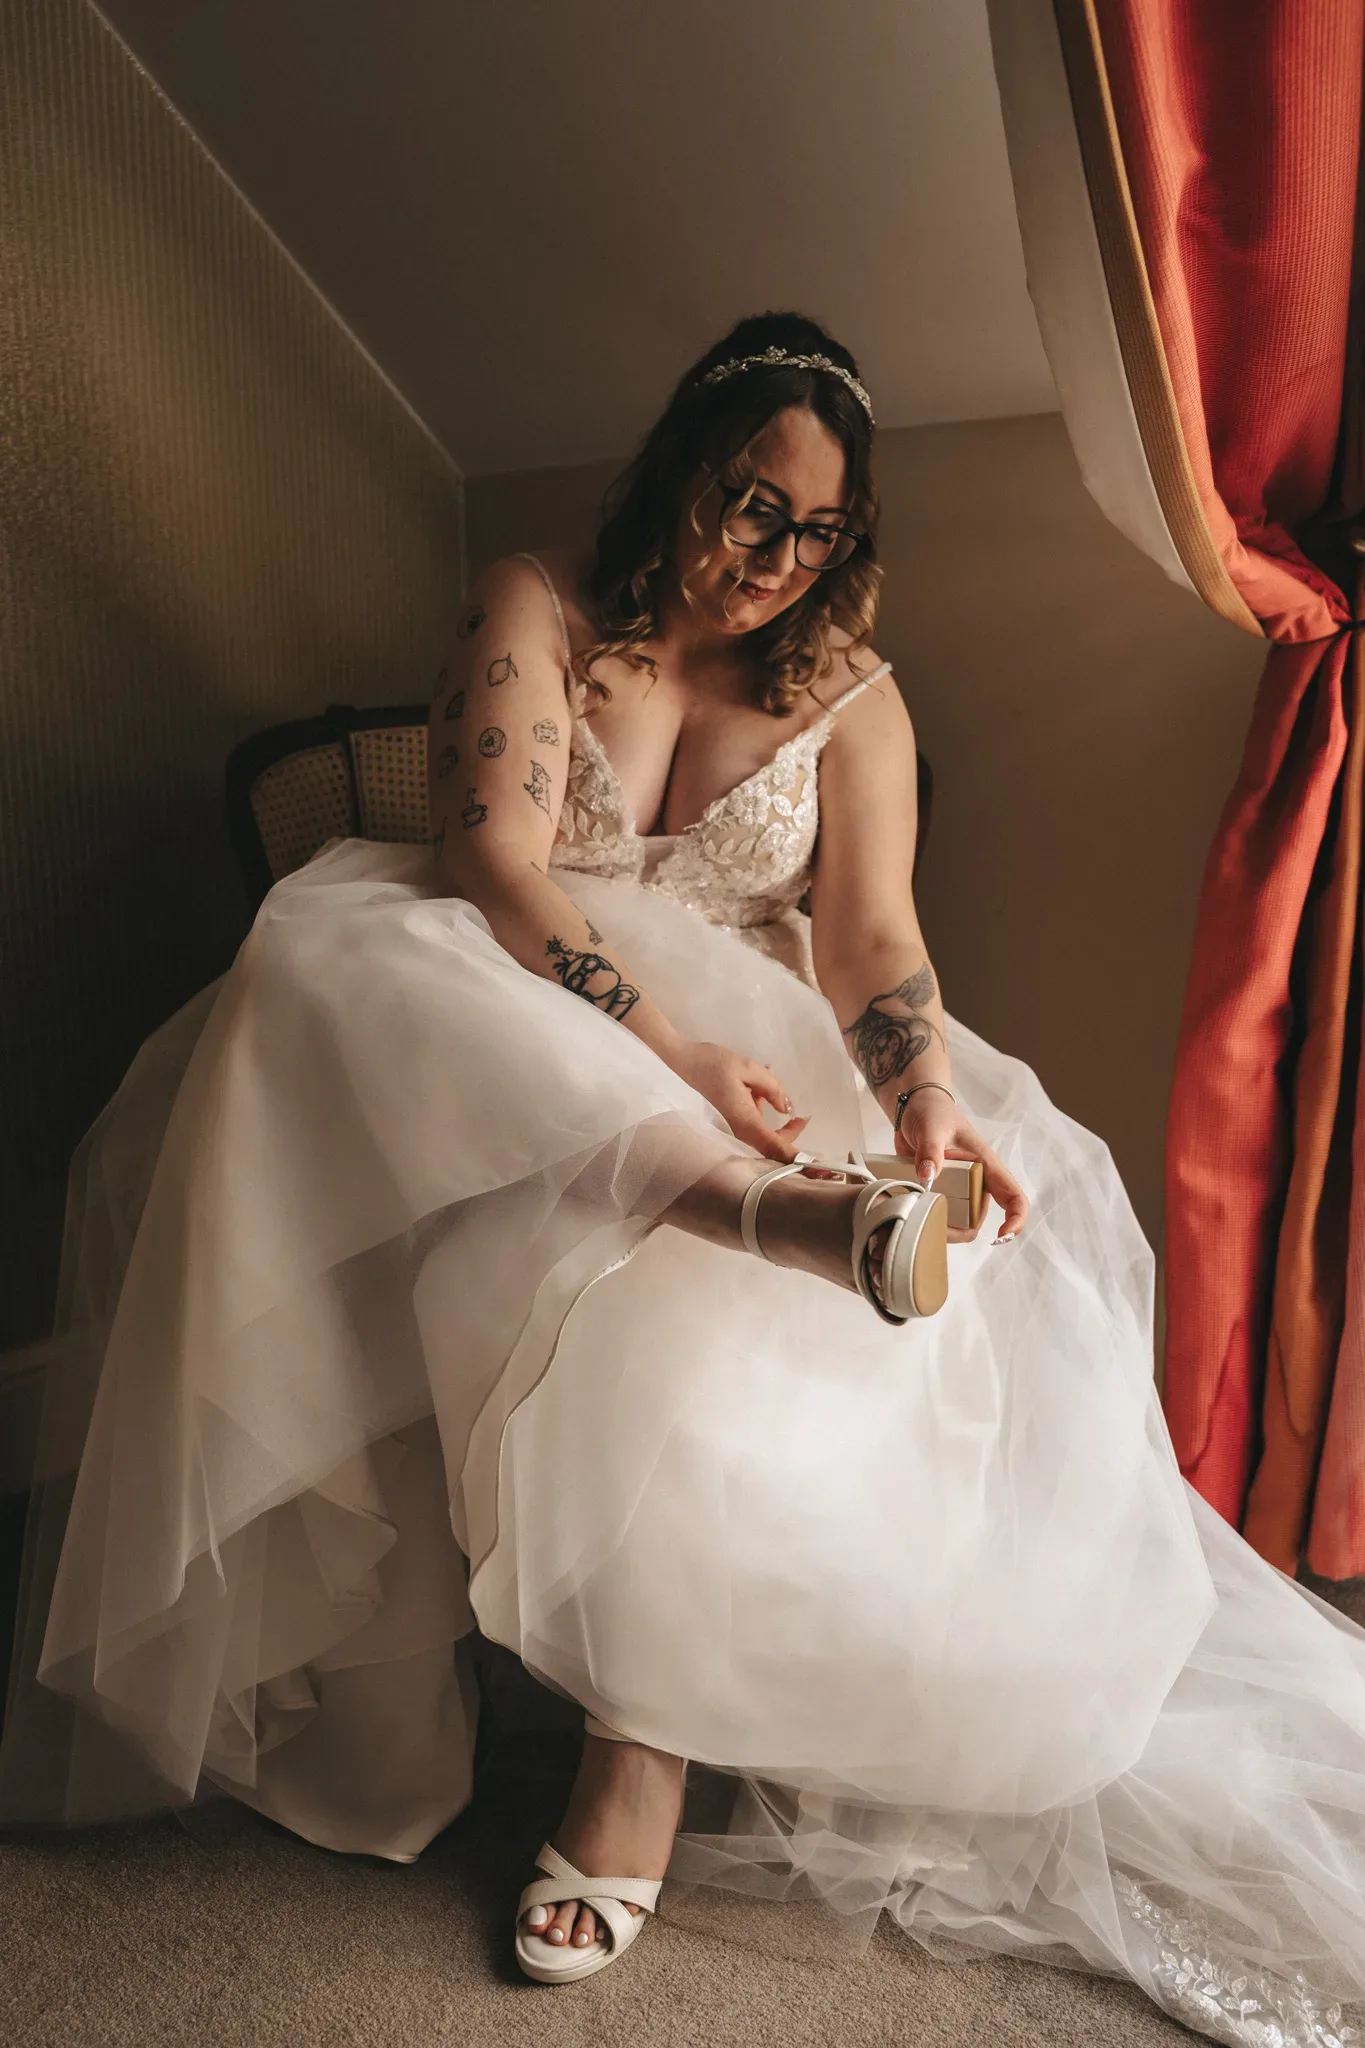 A tattooed bride in a white dress and tiara sits pensively, gently holding her shoe, as soft light filters through a curtain, casting warmth over the scene.